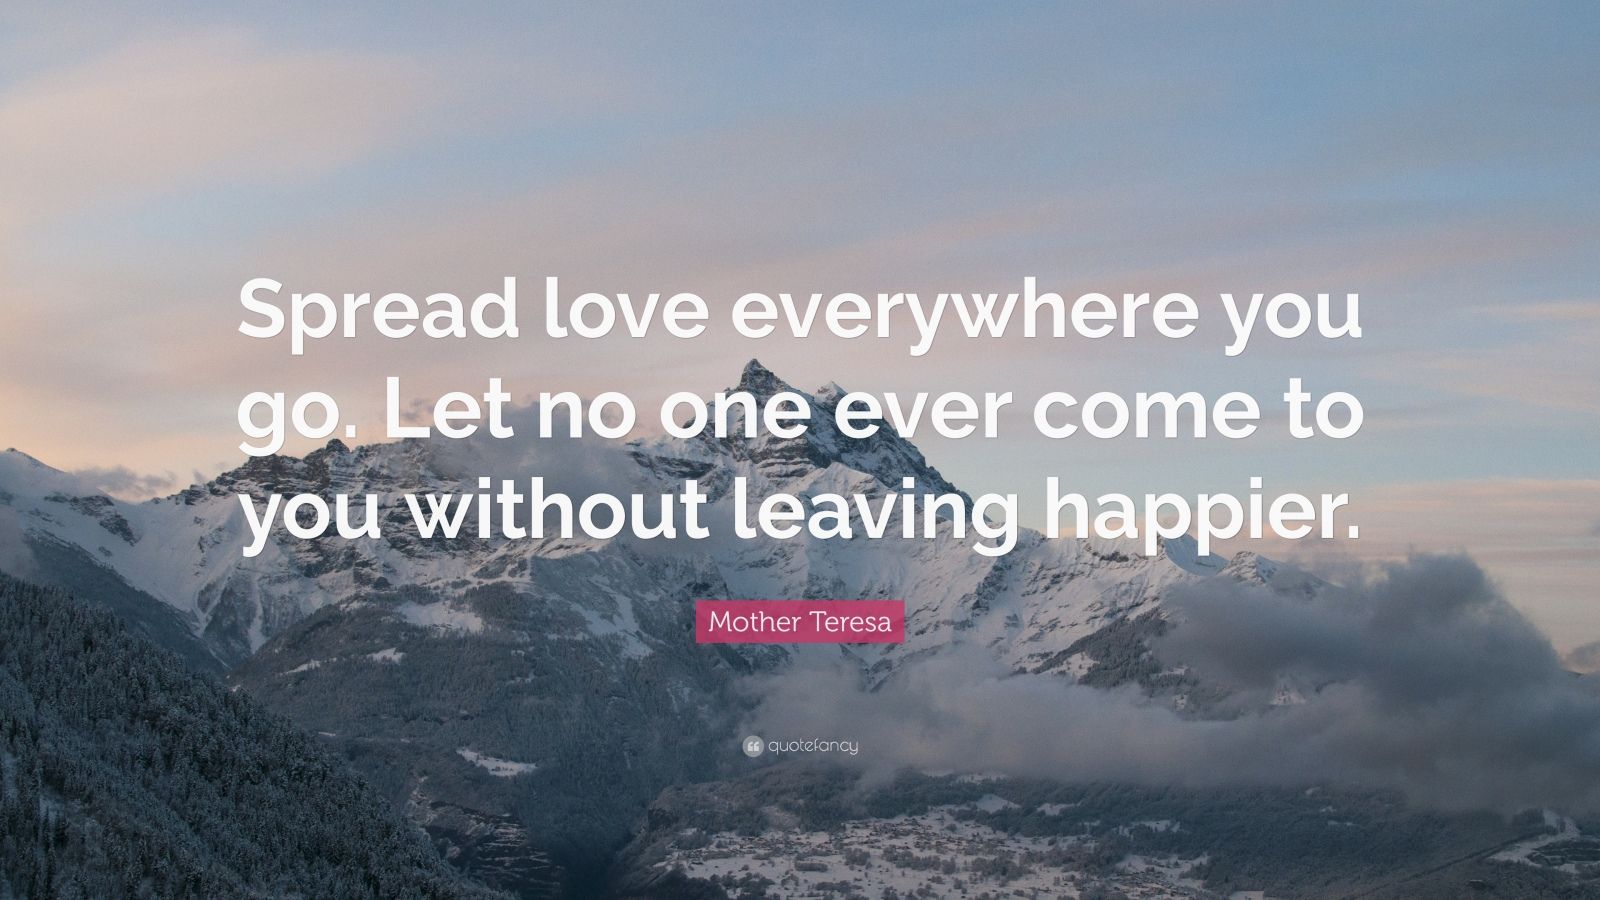 Mother Teresa Quote: “Spread love everywhere you go. Let no one ever ...